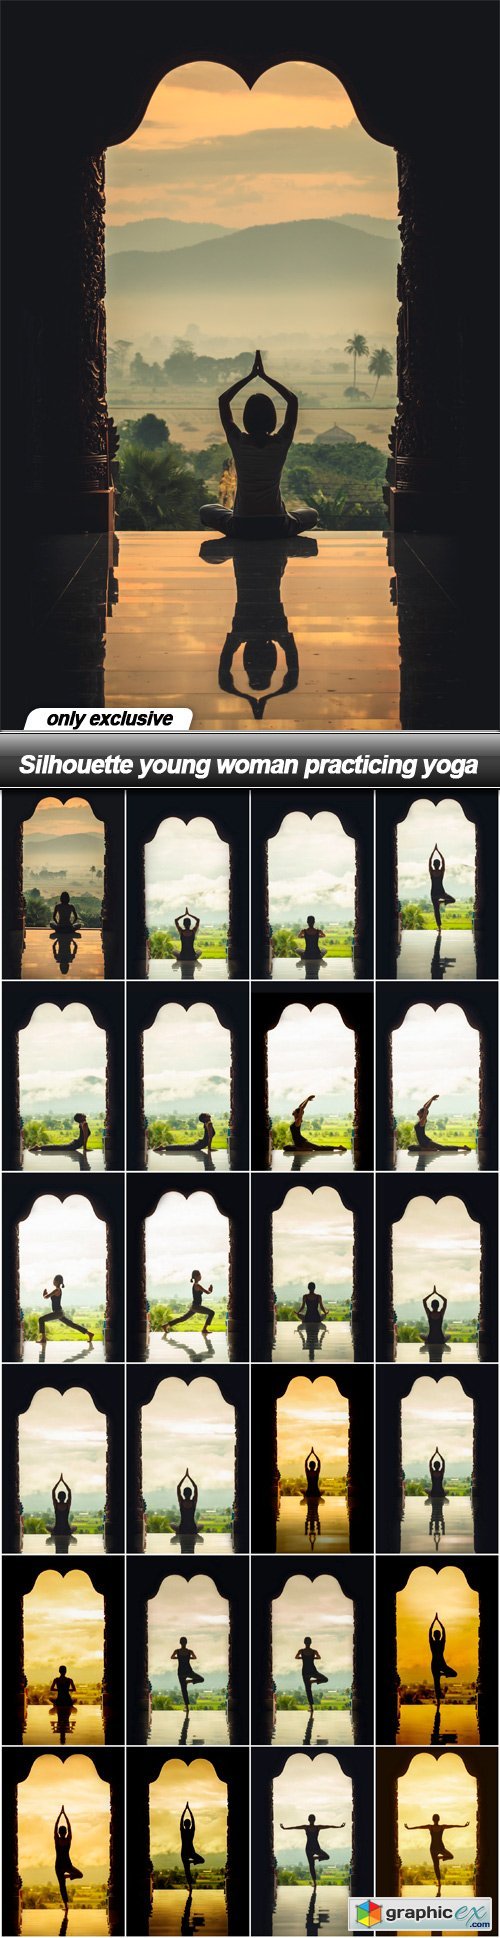 Silhouette young woman practicing yoga - 25 UHQ JPEG